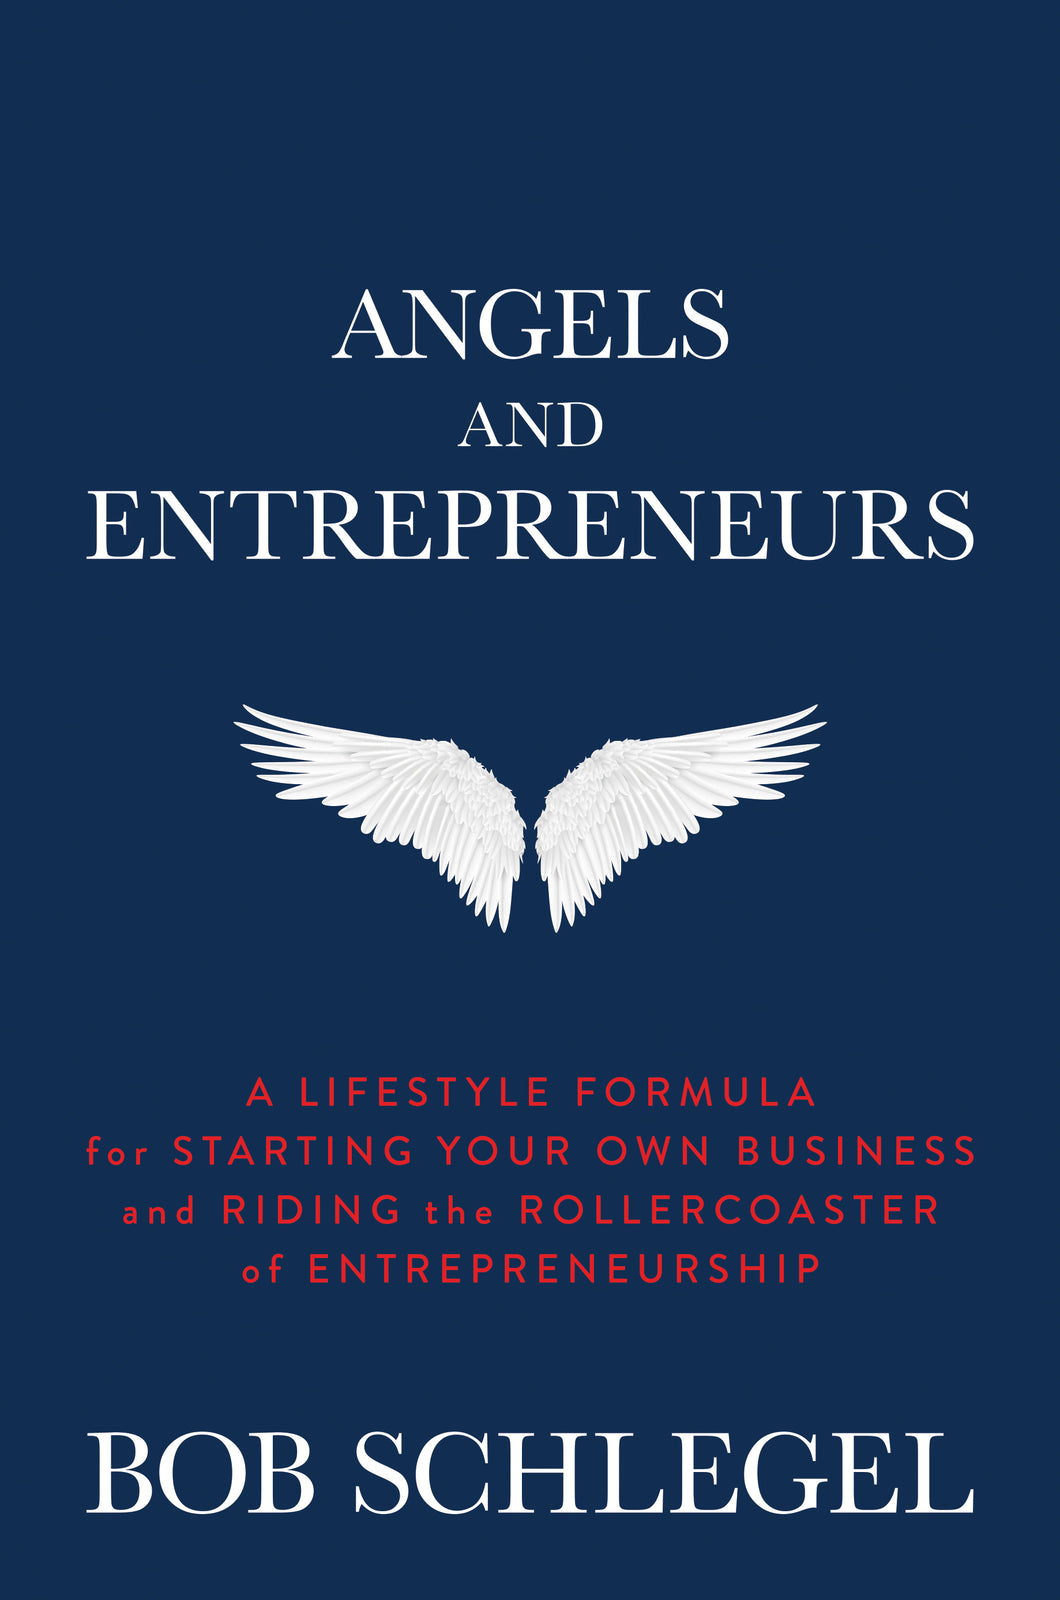 Angels and Entrepreneurs: A Lifestyle Formula for Starting Your Own Business and Riding the Rollercoaster of Entrepreneurship by Bob Schlegel